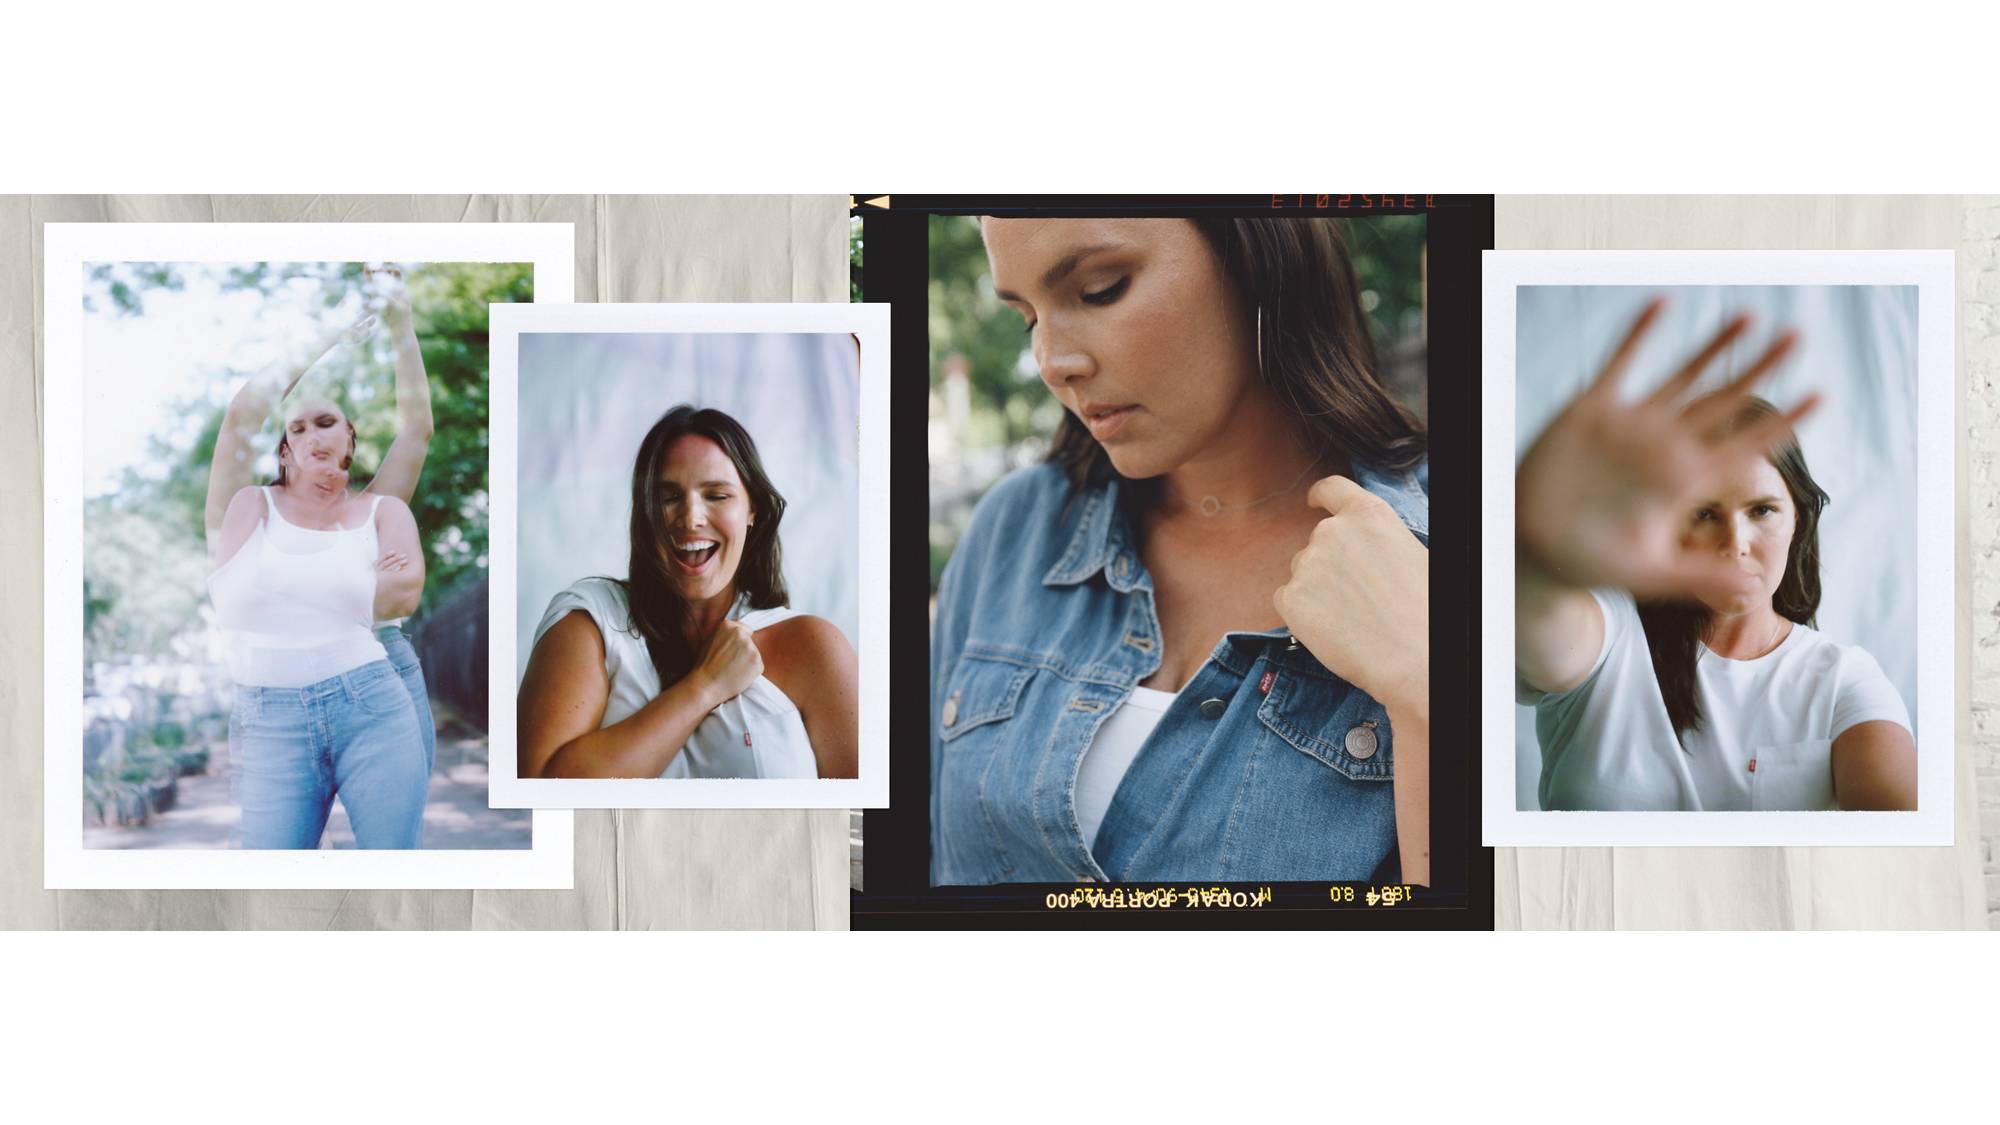 showcasing 4 images of woman